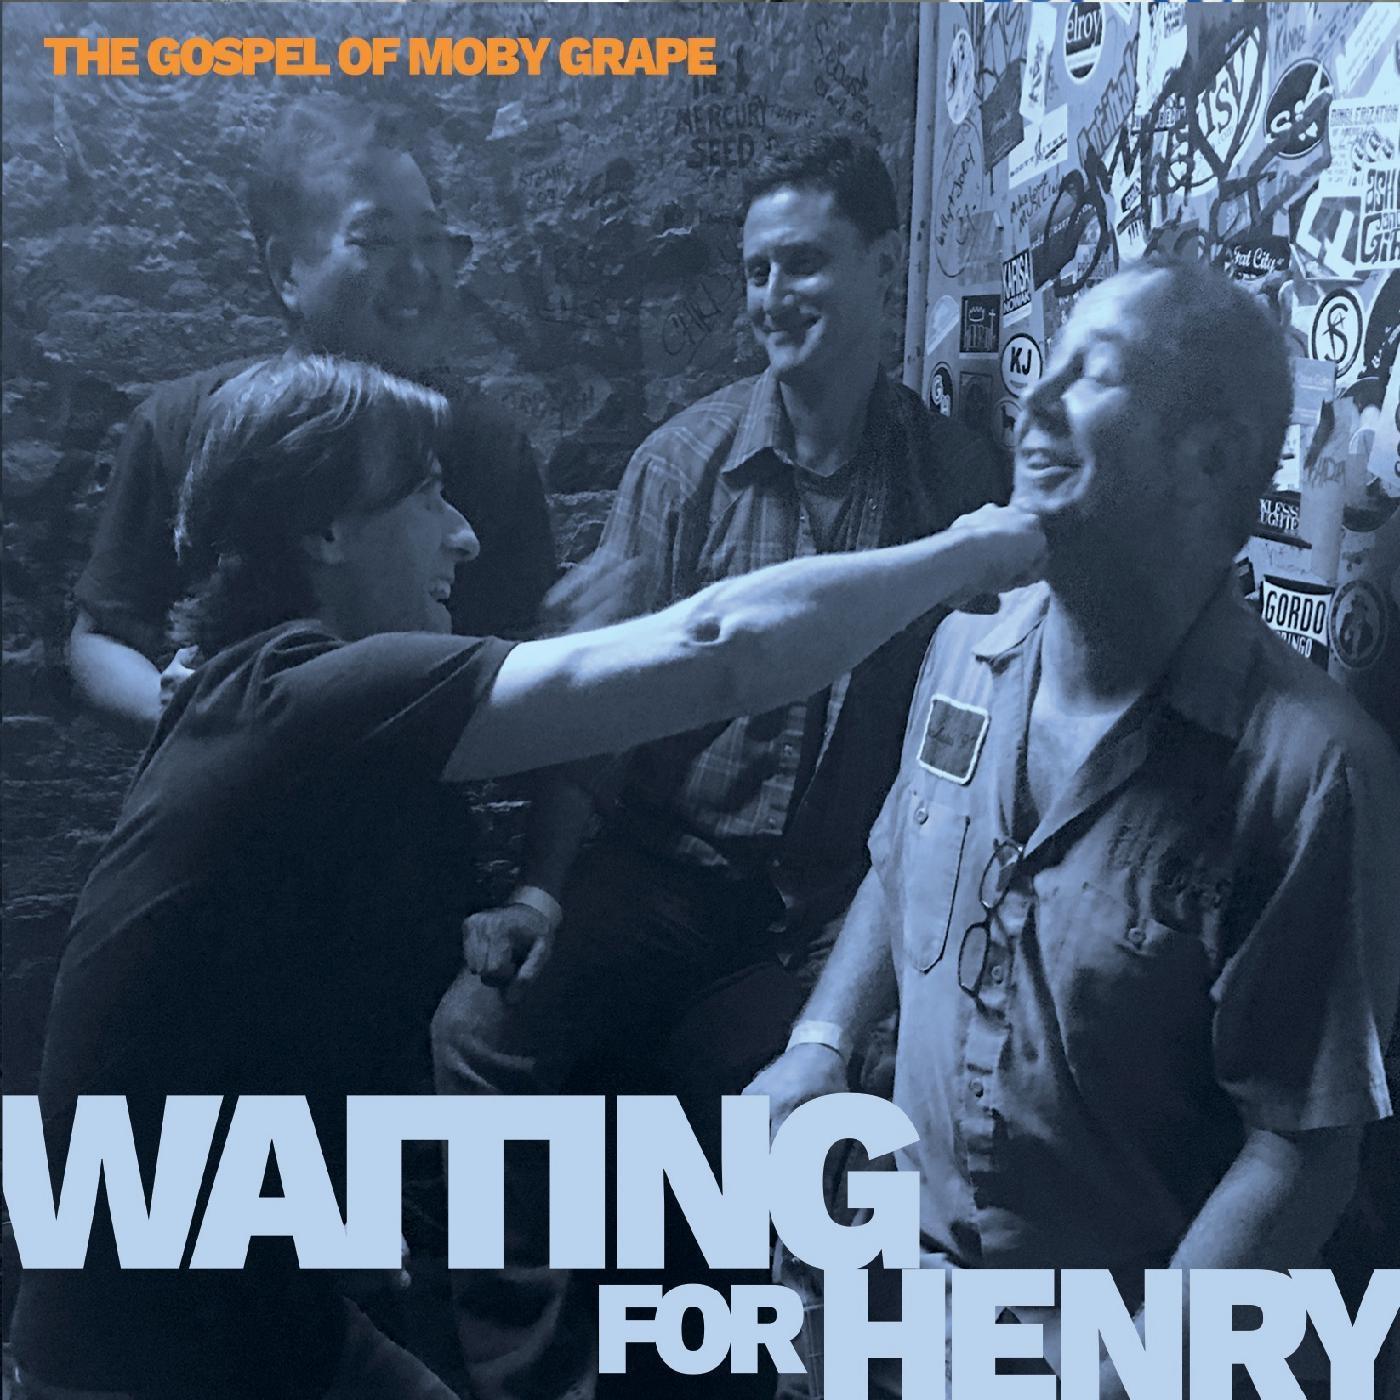 The Gospel of Moby Grape